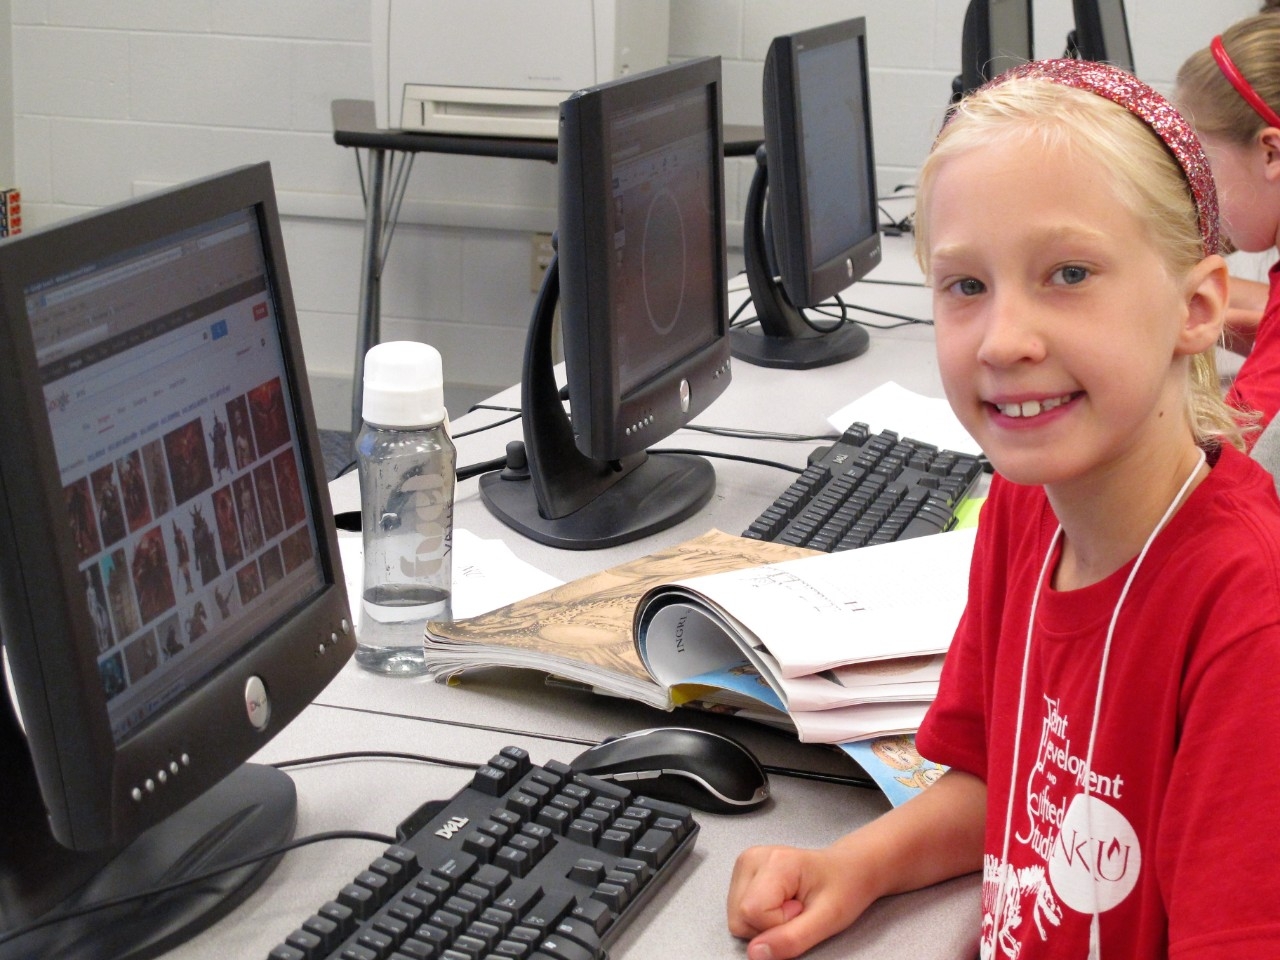 Learn Robotics, Engineering, Web Design, and Physics at Camp Innovation